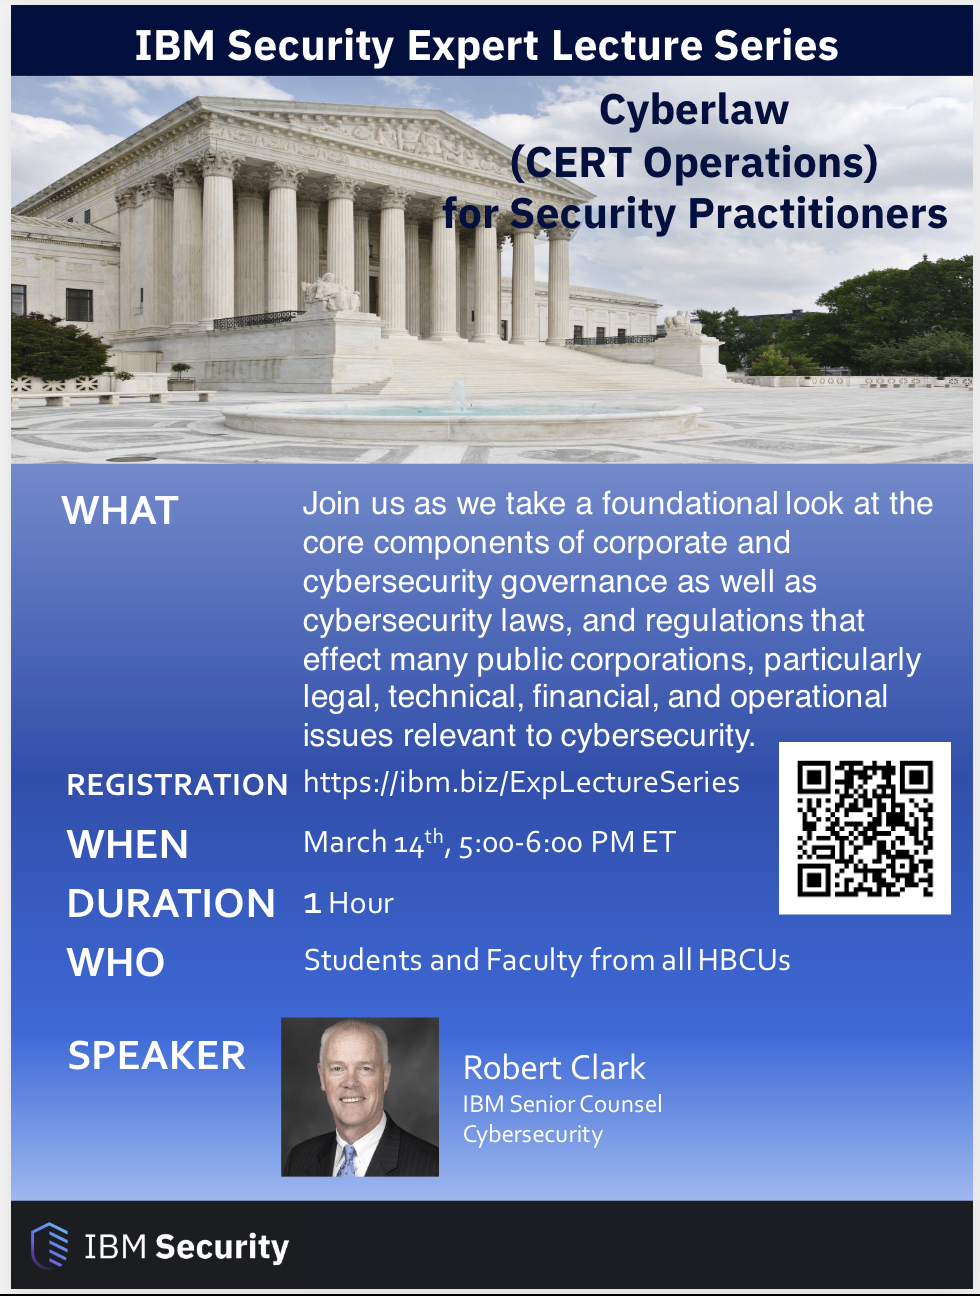 IBM Security Expert Lecture Series